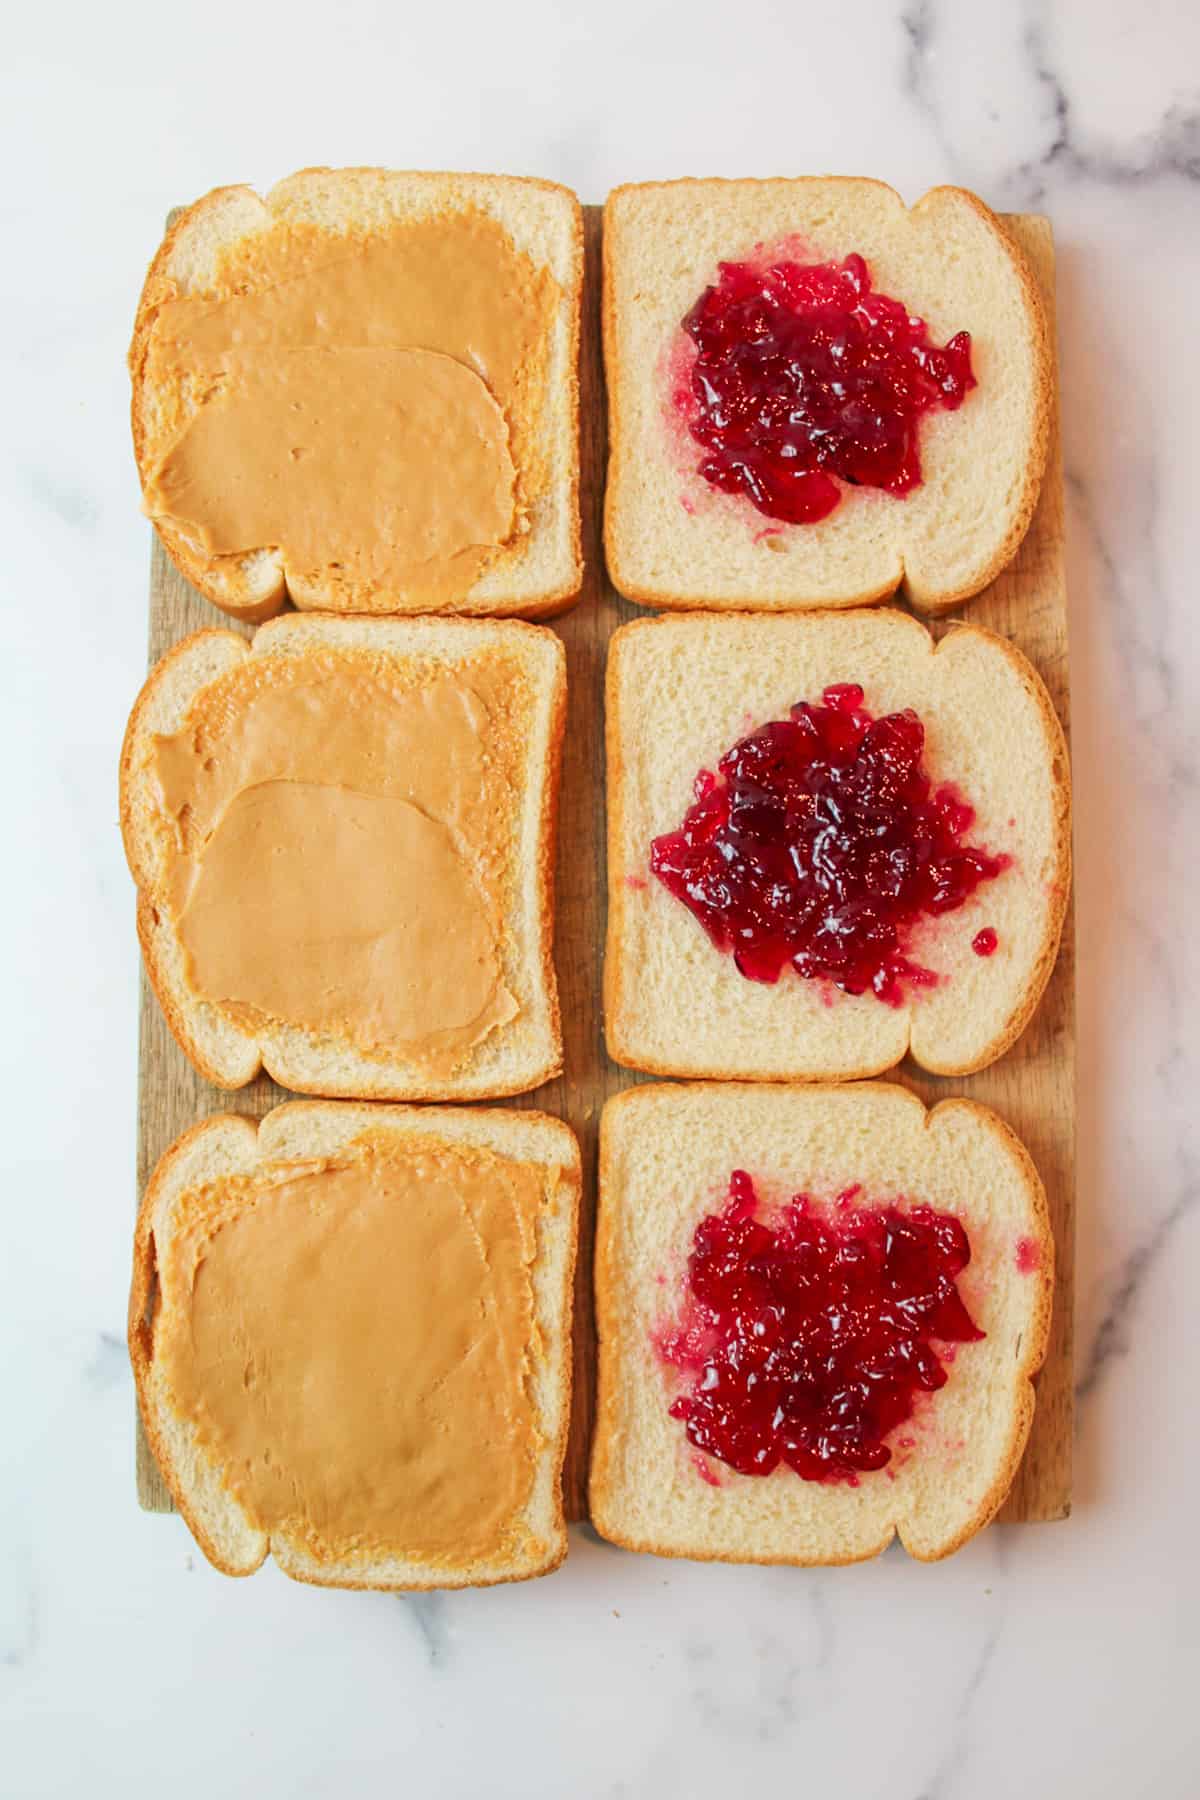 6 slices of white sandwich bread topped with peanut butter and jelly